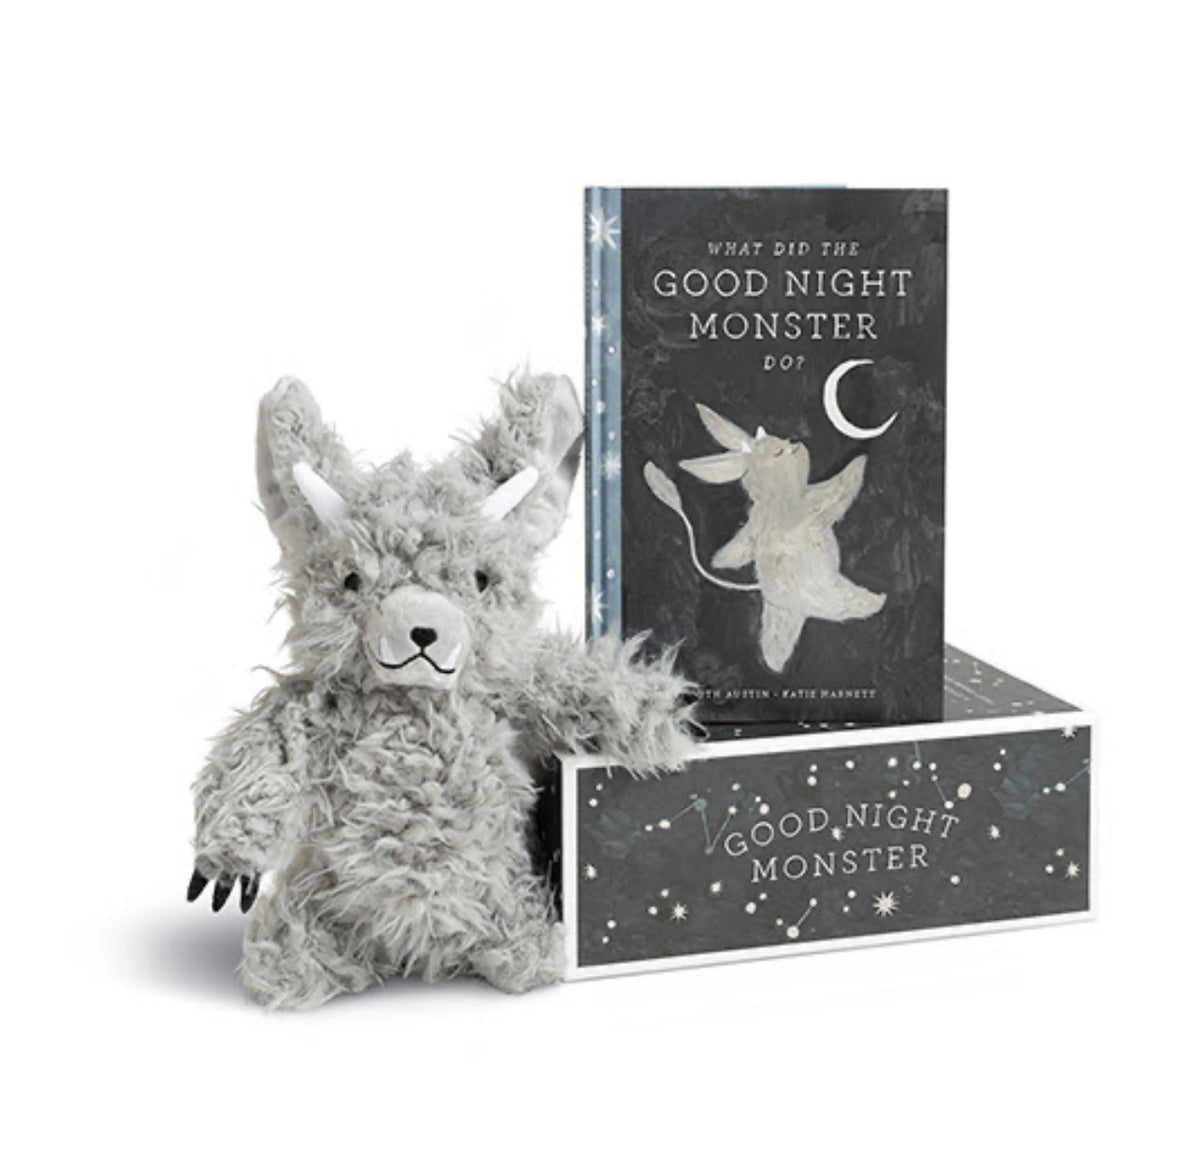 Good night Monster gift set ages 3-6 years .